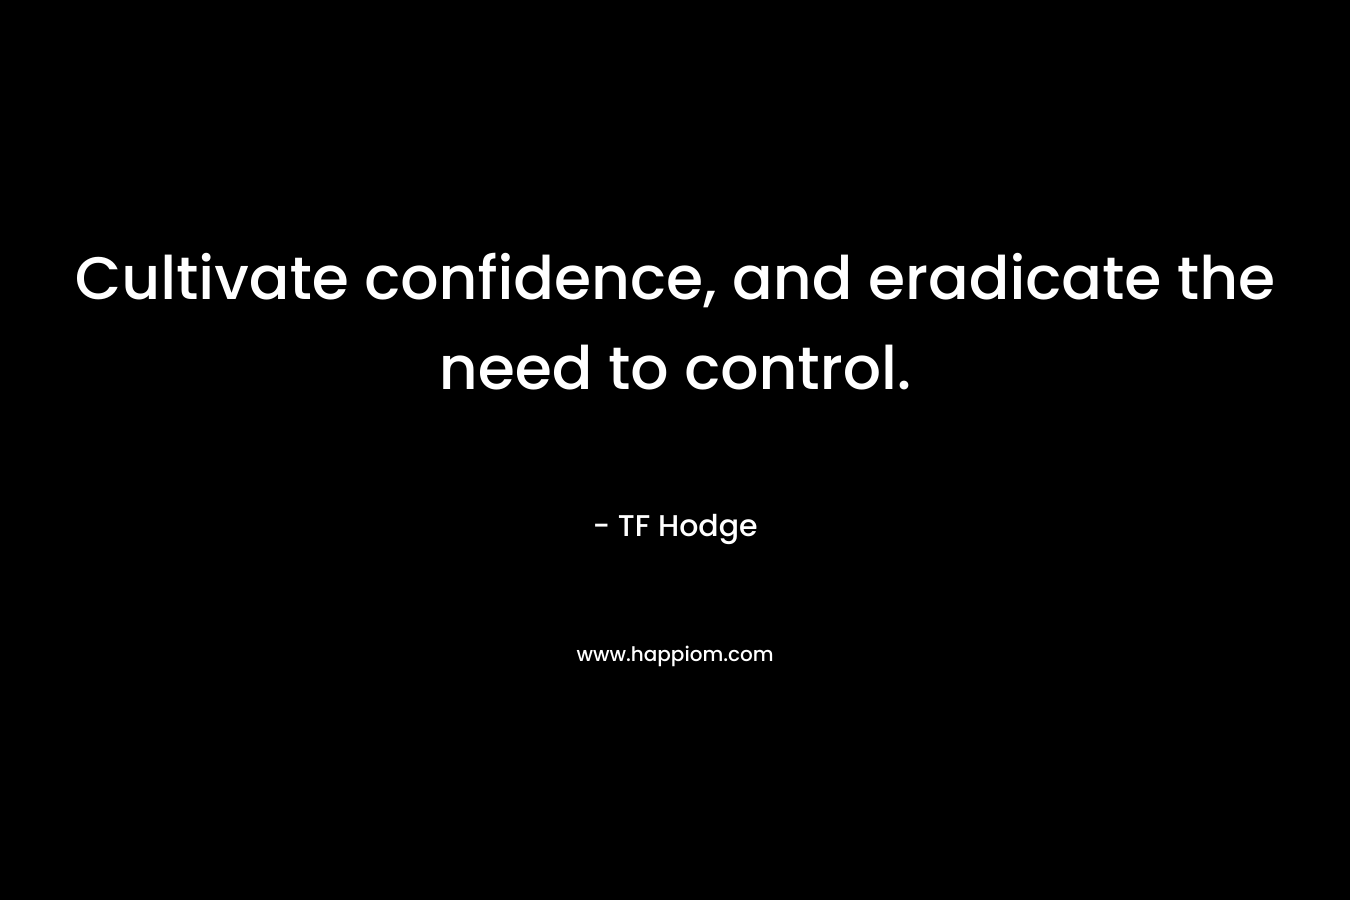 Cultivate confidence, and eradicate the need to control.